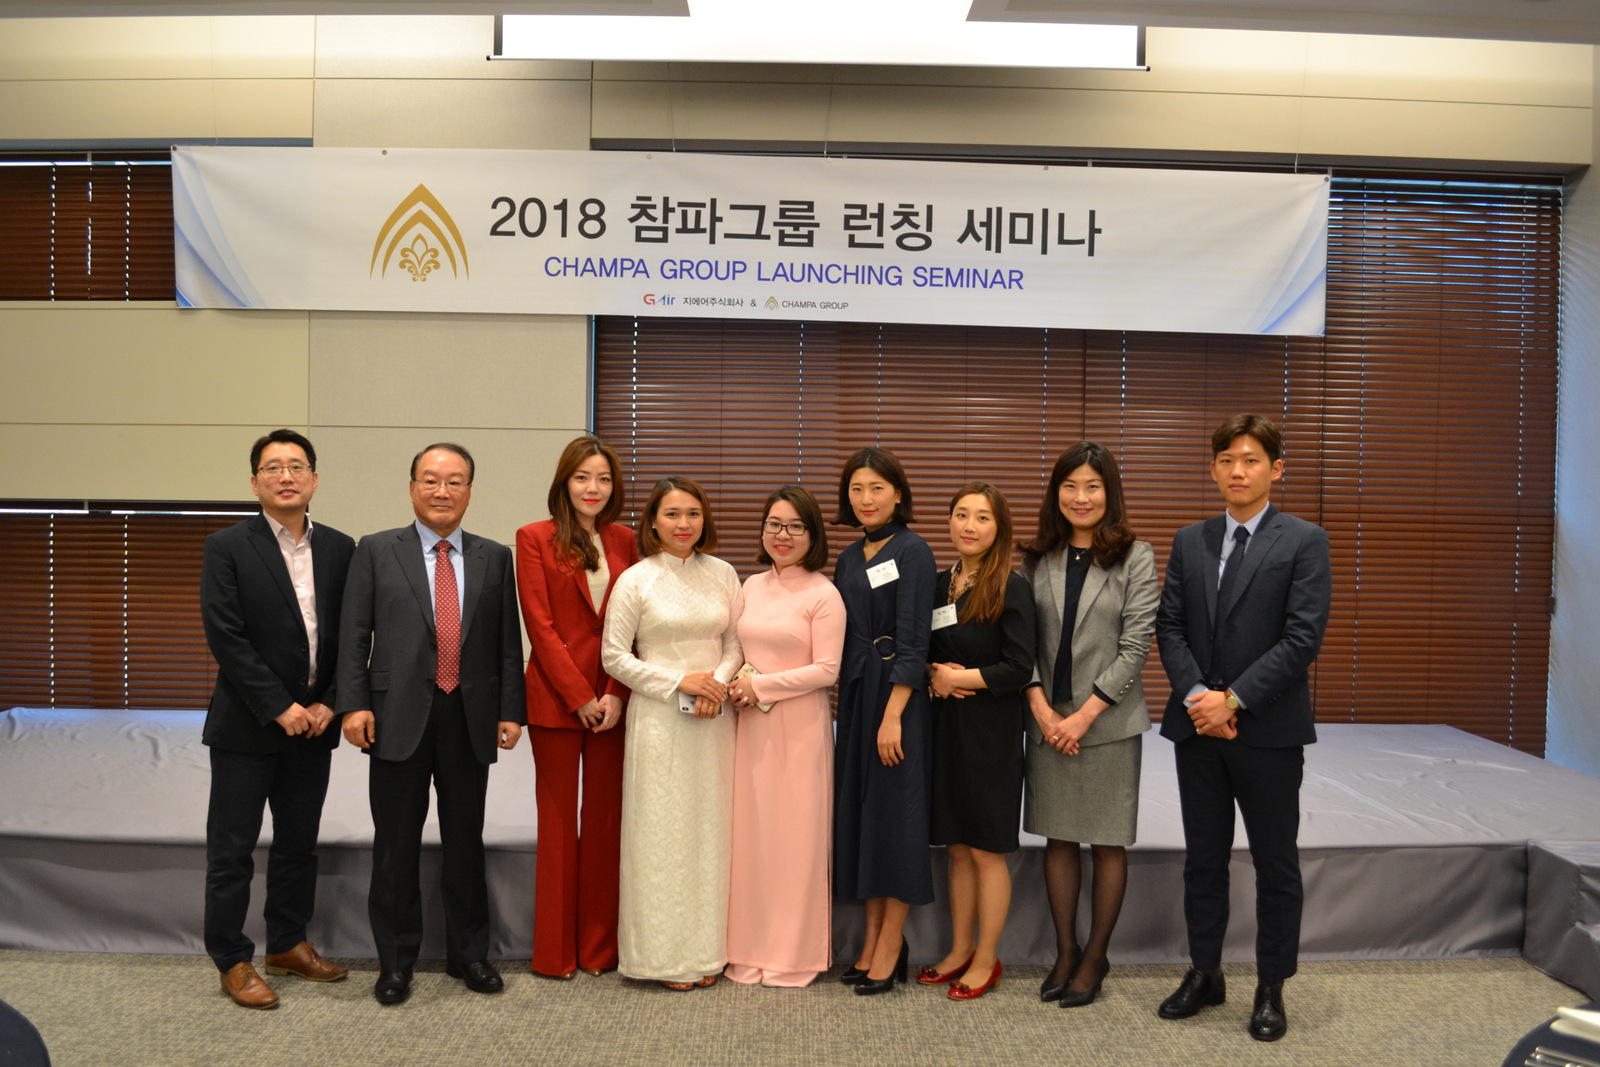 Representatives of ChampaGroup and some partners in Korea